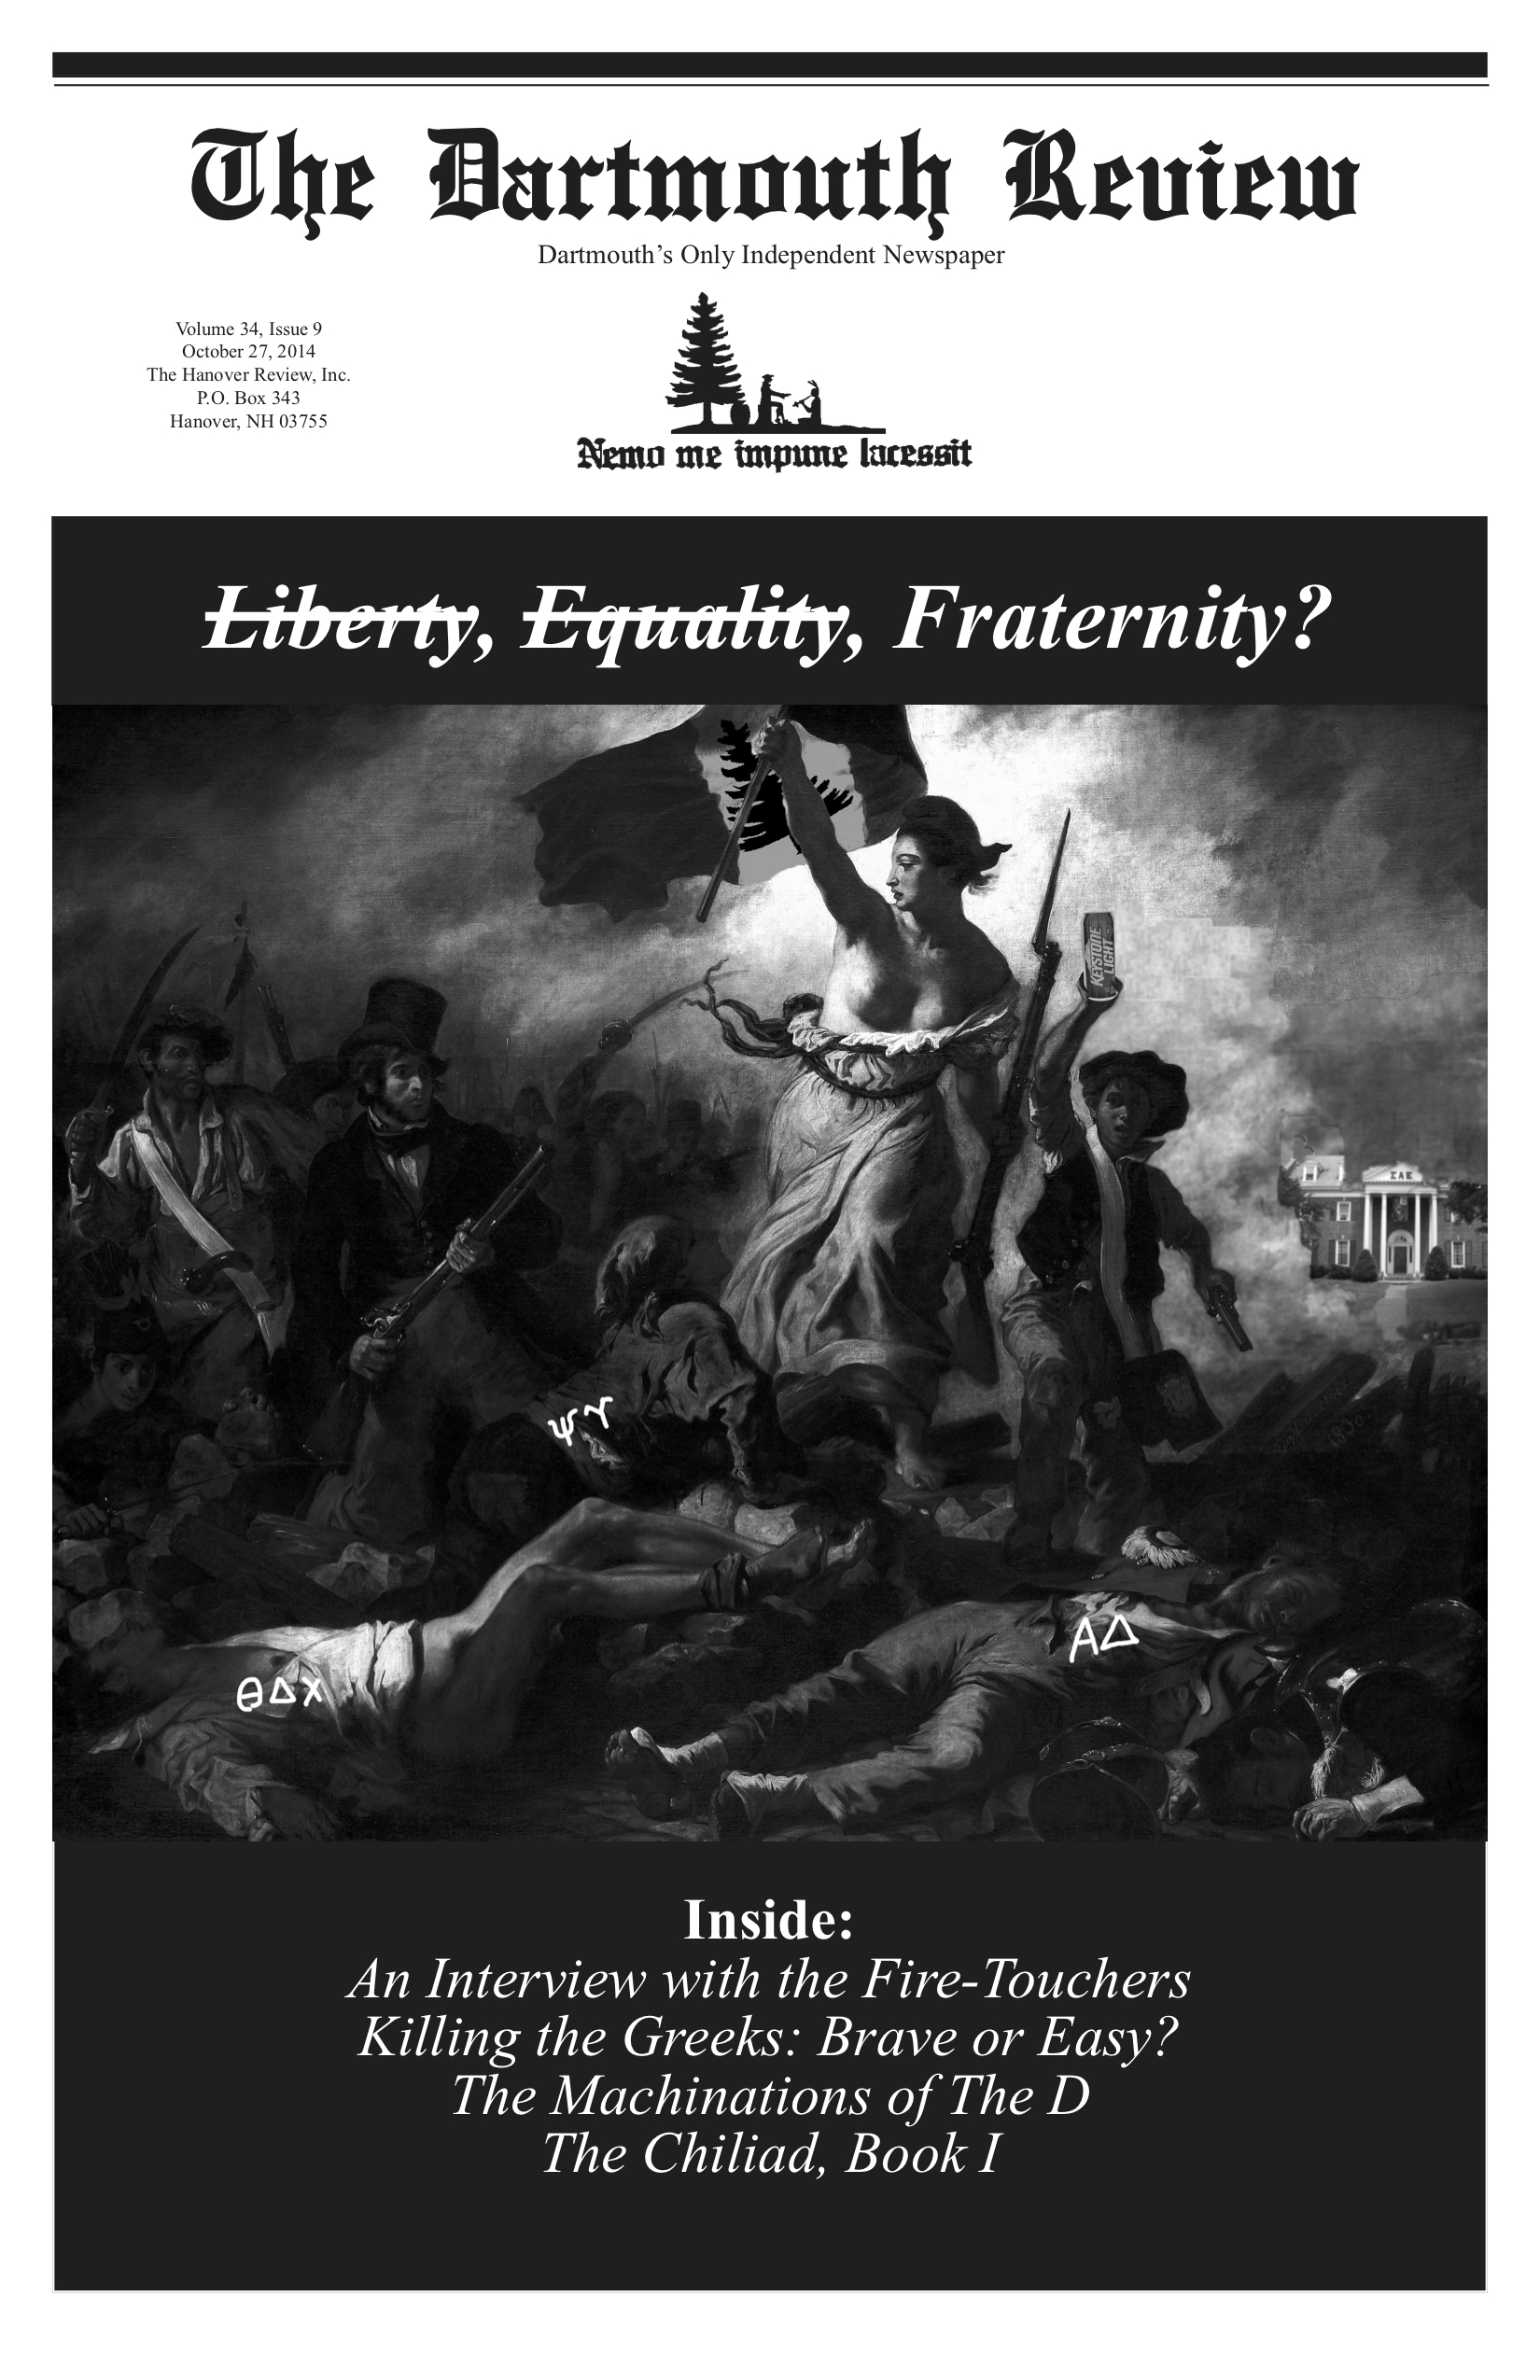 Liberty, Equality, Fraternity? The Dartmouth Review